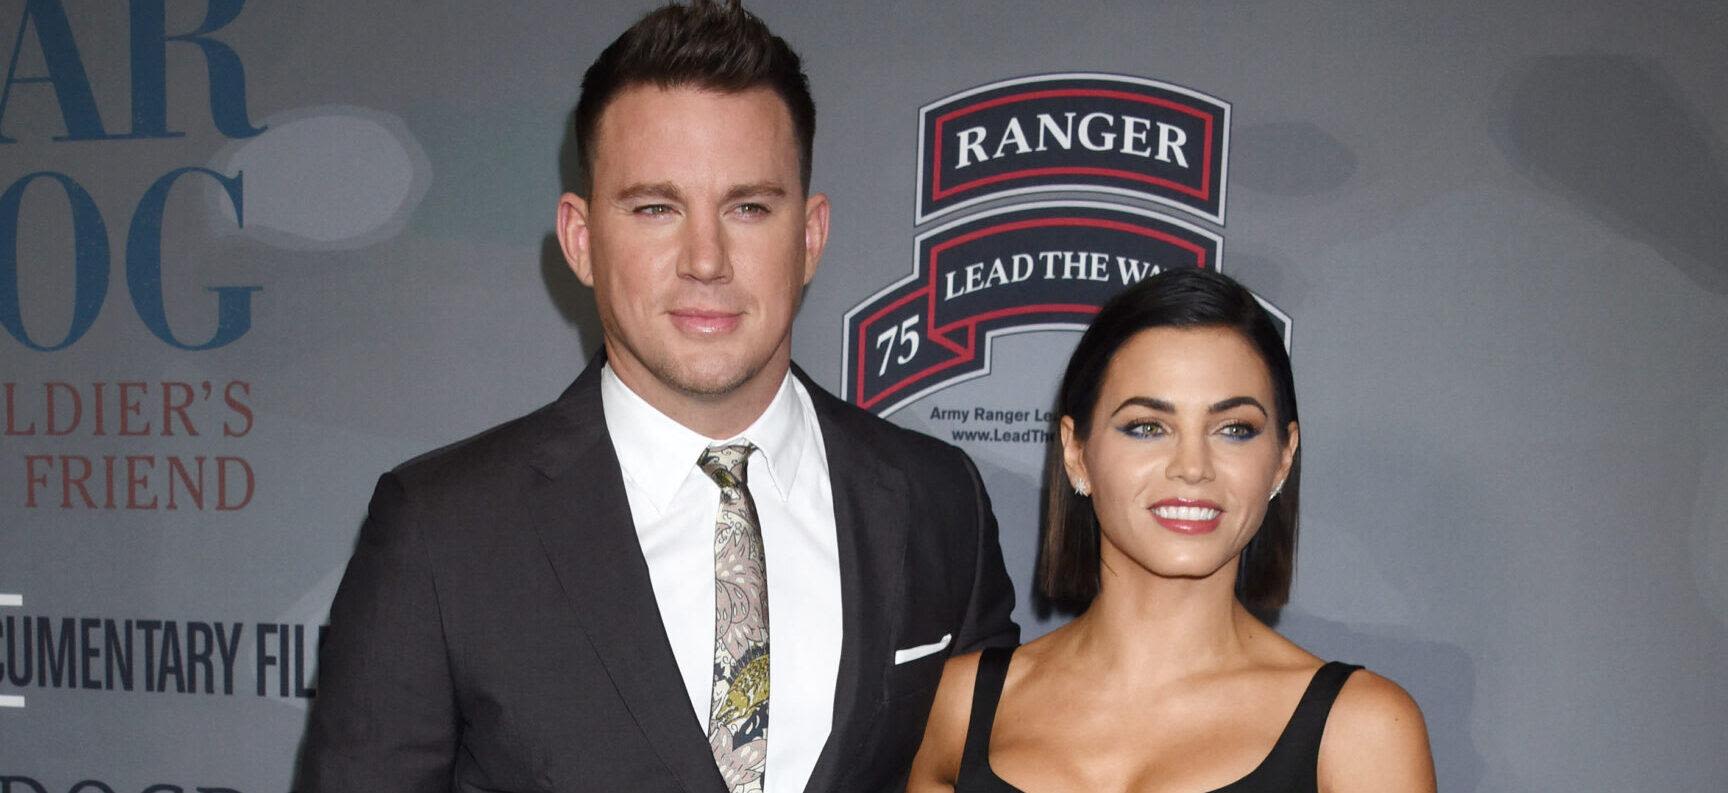 Channing Tatum Accuses Jenna Dewan Of Employing A 'Delay Tactic' To Stall Their Financial Settlement